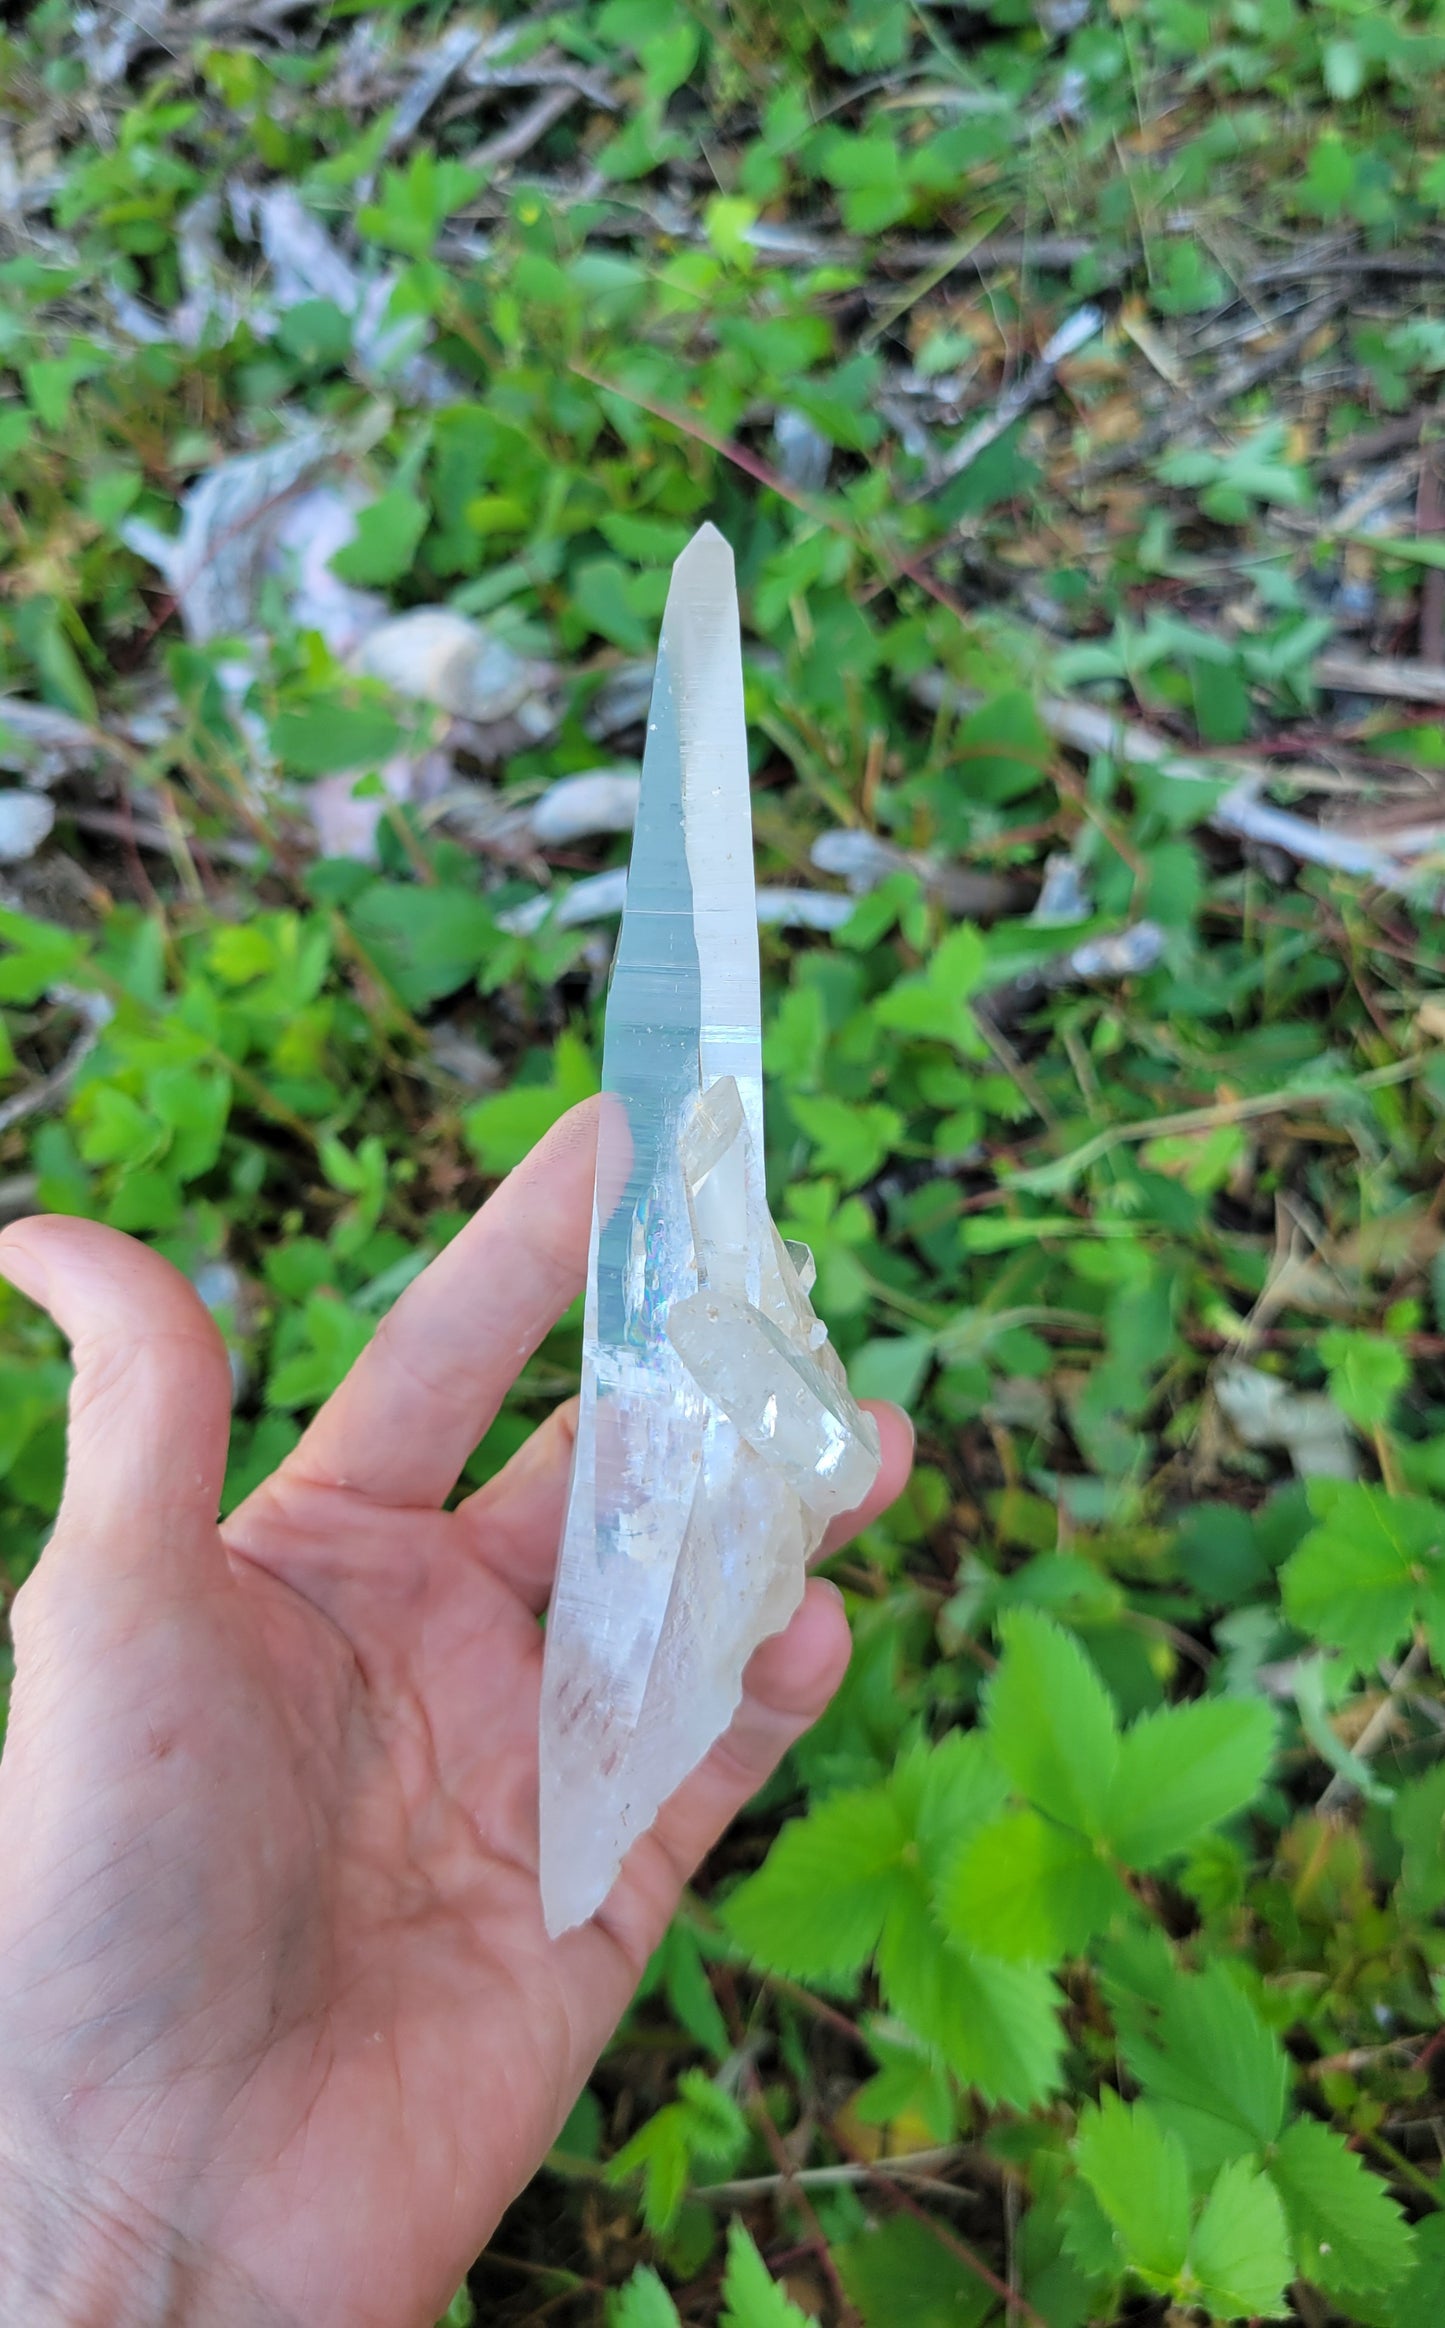 Lemurian Quartz from Colombia